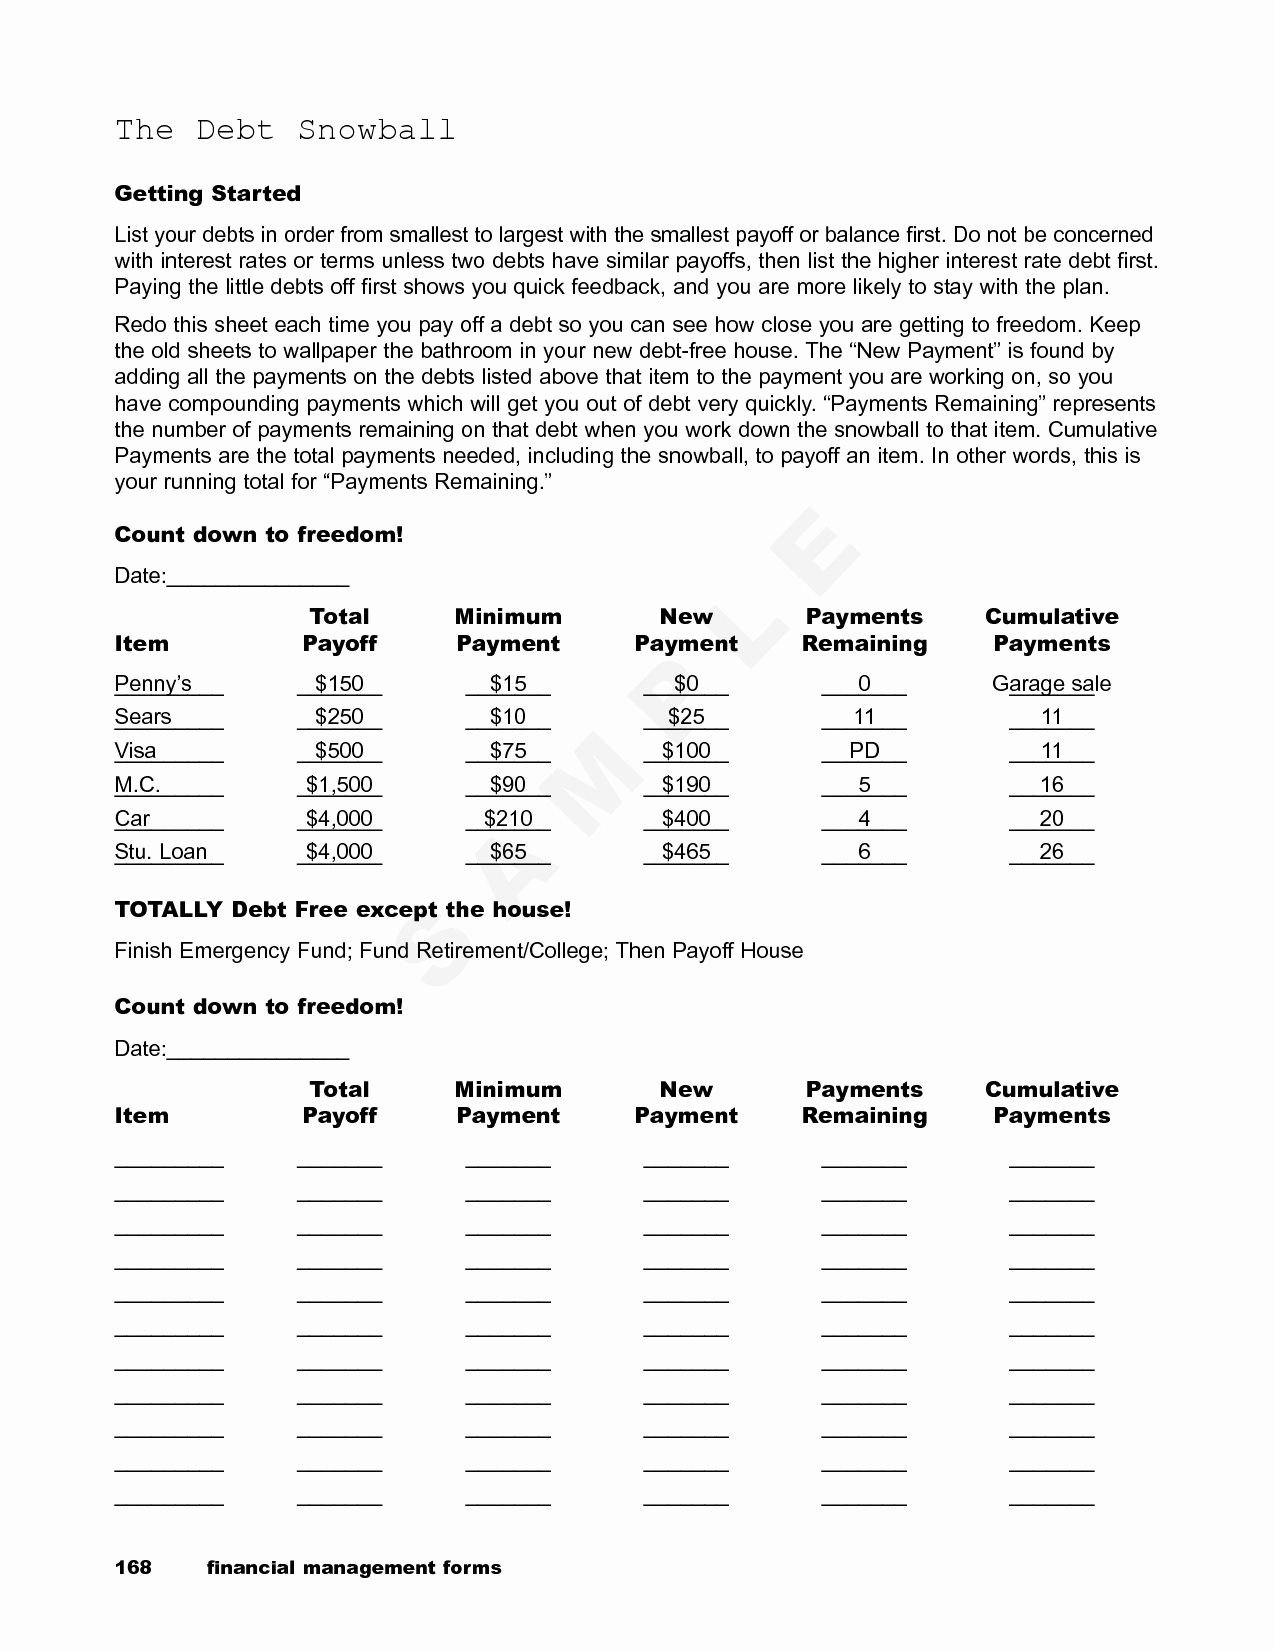 The Debt Snowball Worksheet Answers  Briefencounters For The Debt Snowball Worksheet Answers